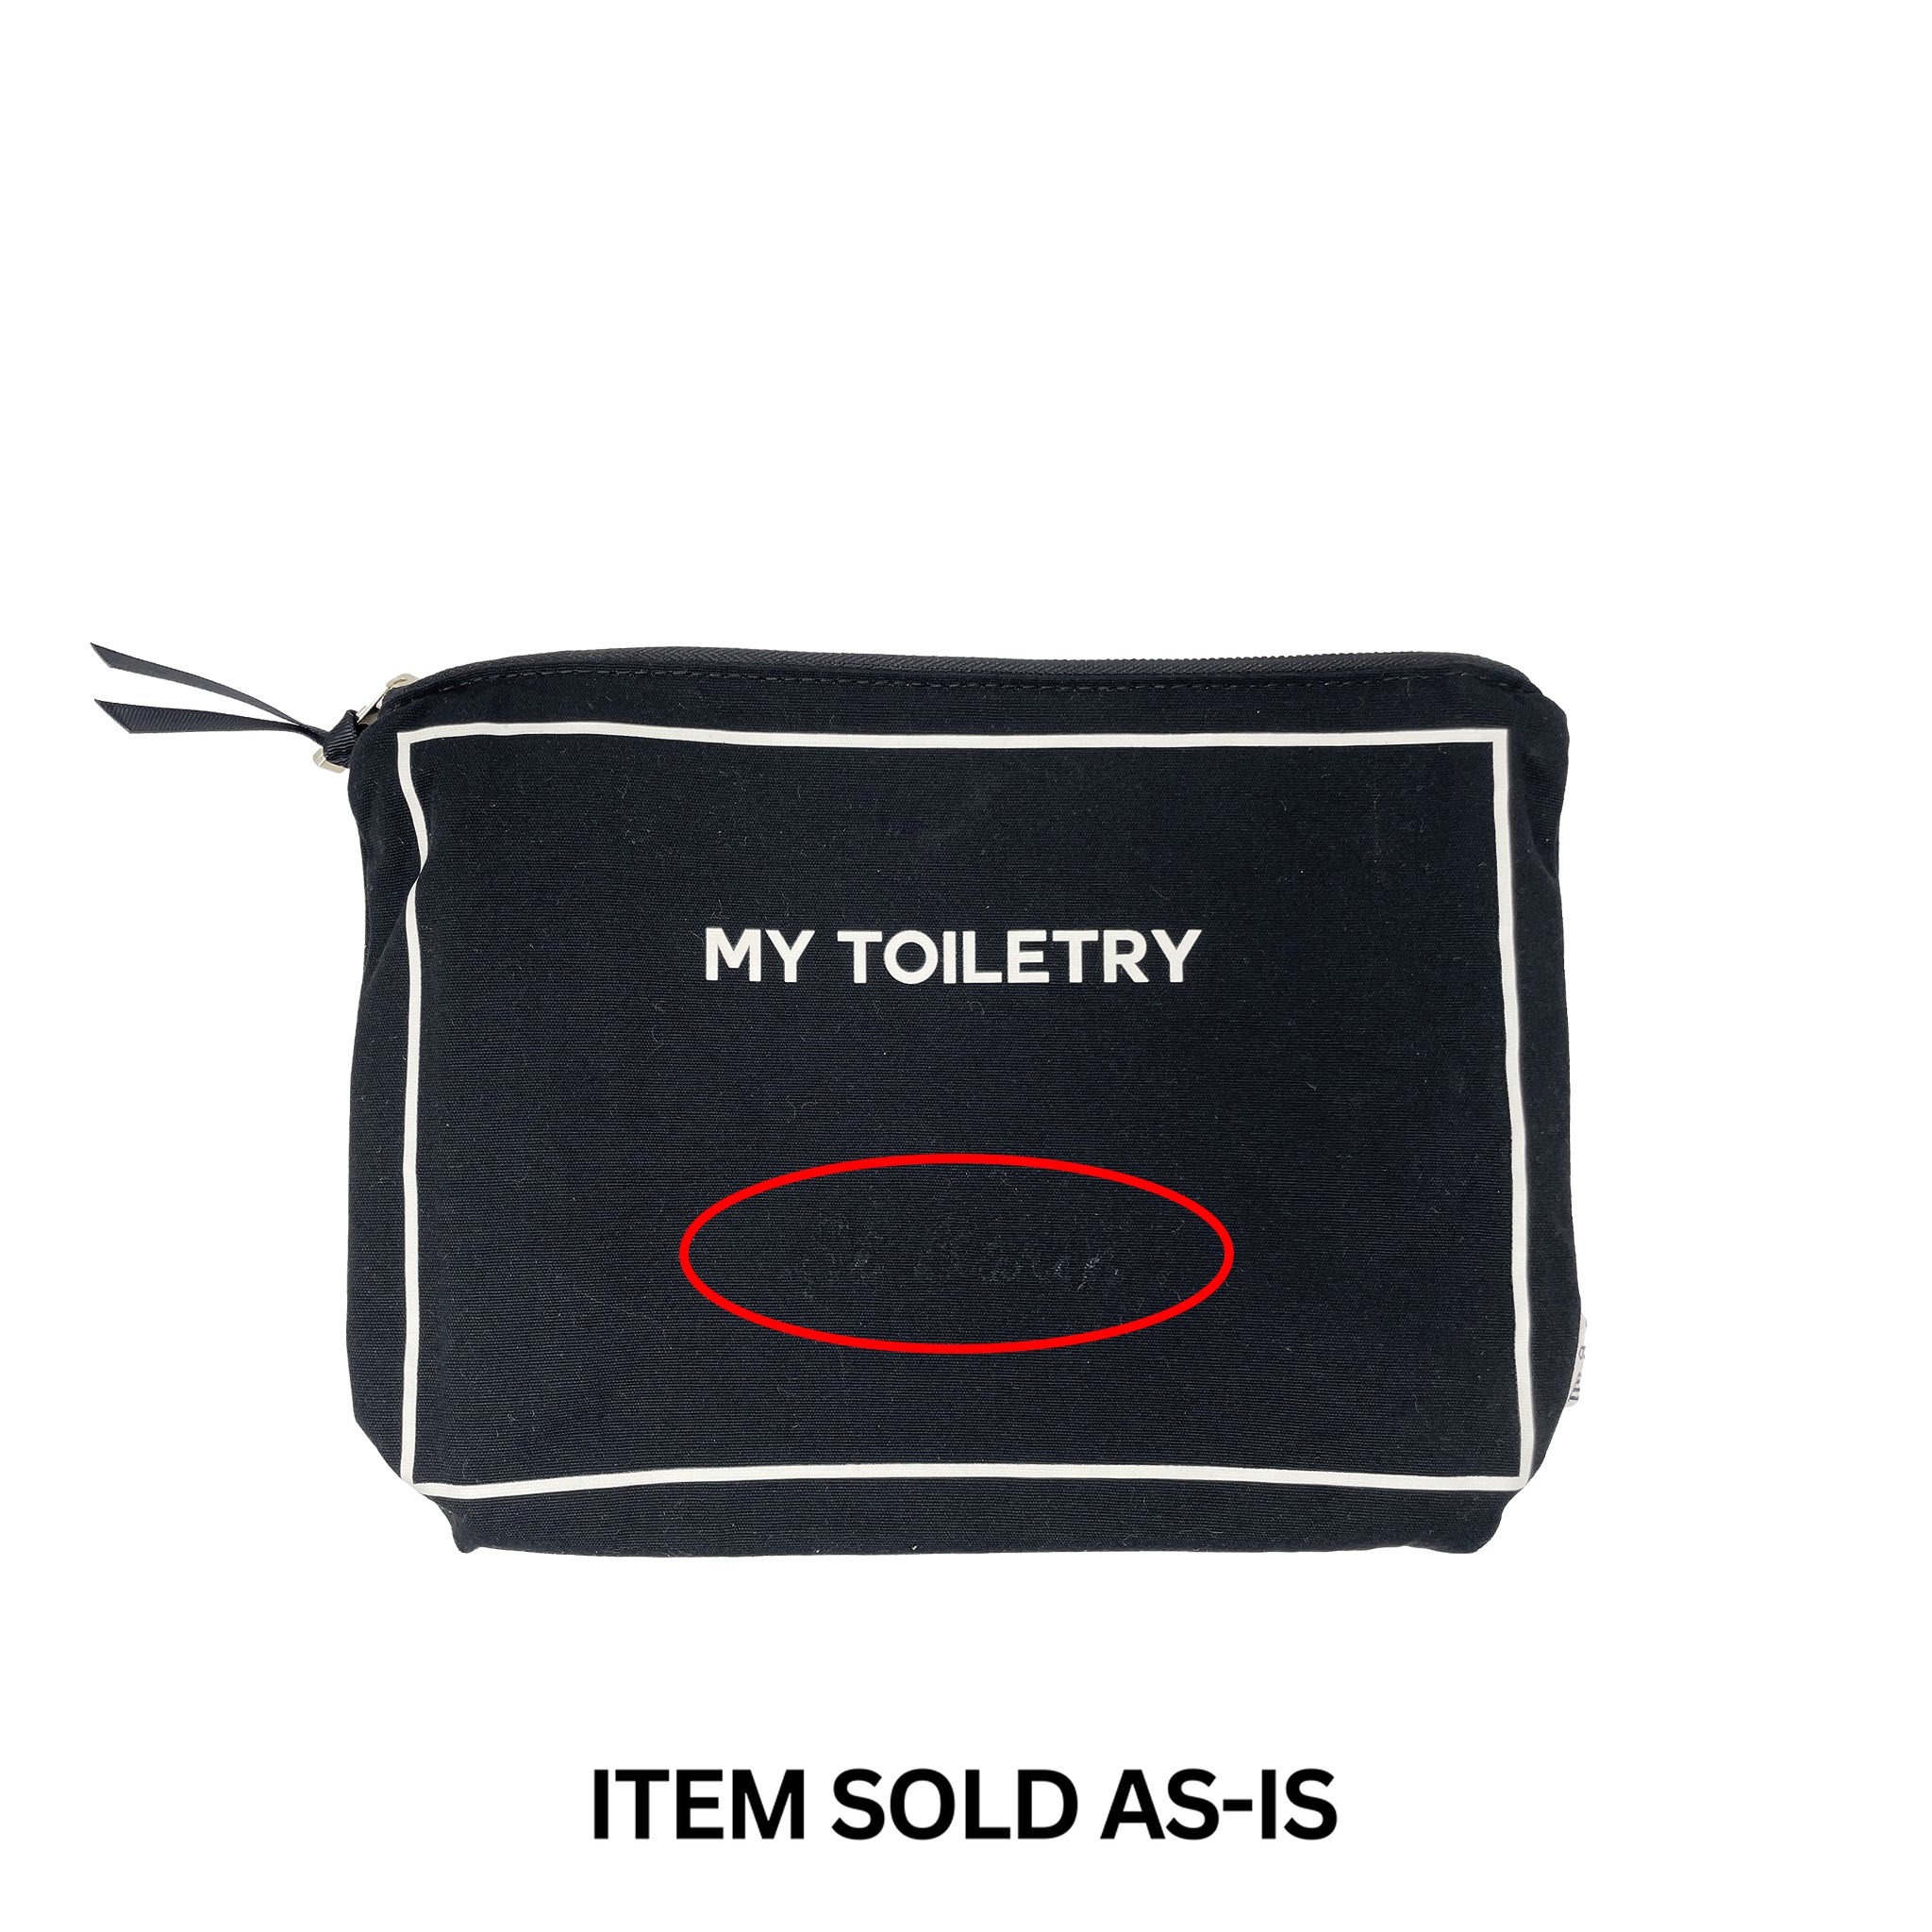 SALES BIN - Toiletry Pouch with Coated Lining, Black - Bag-all